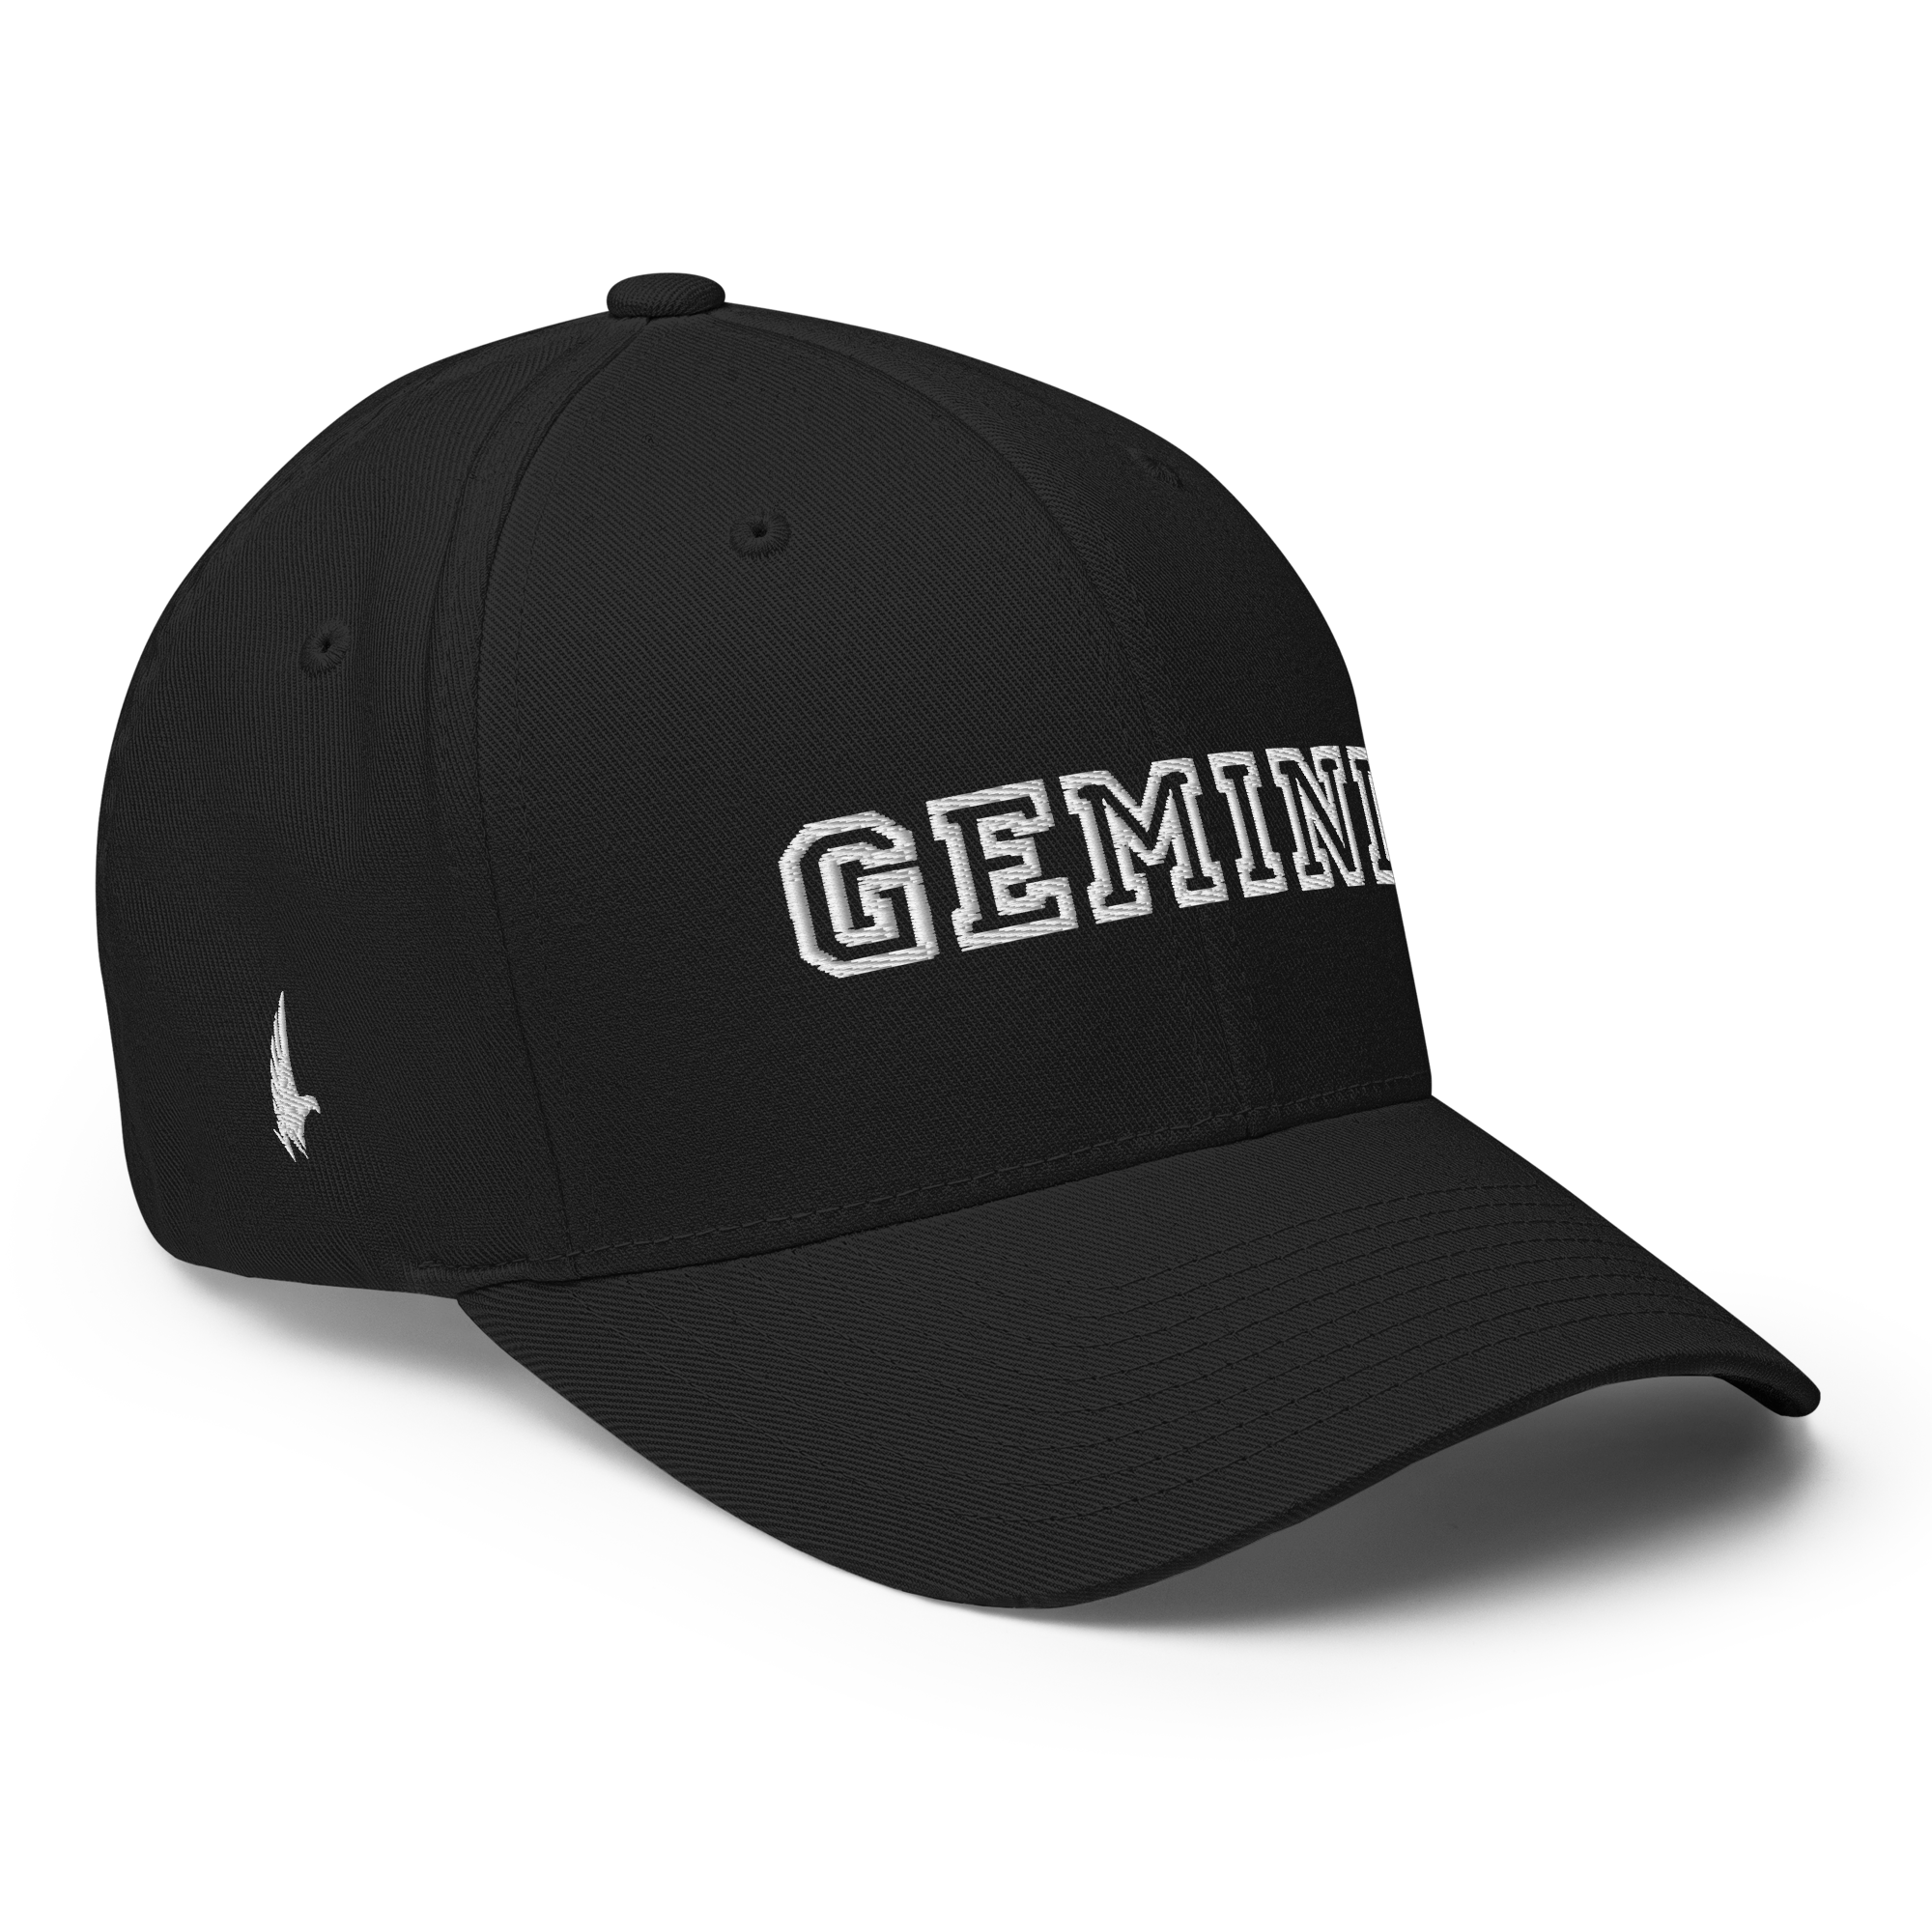 Gemini Legacy Fitted Hat Black White - Loyalty Vibes